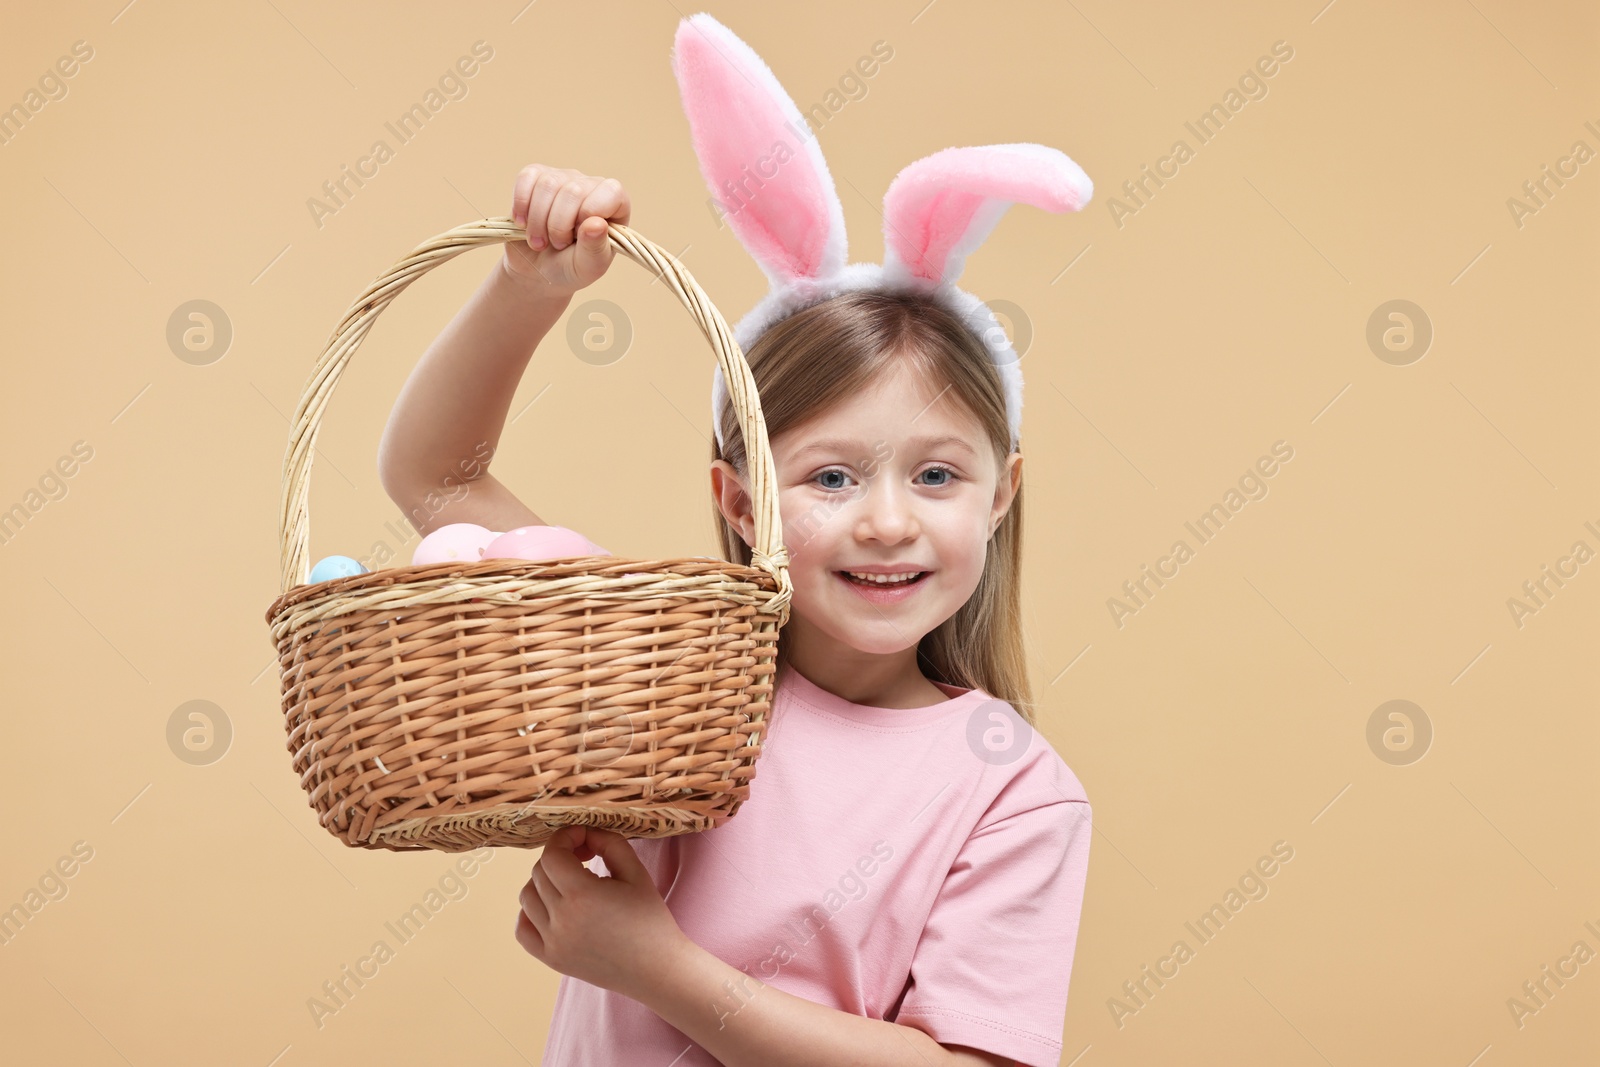 Photo of Easter celebration. Cute girl with bunny ears holding basket of painted eggs on beige background